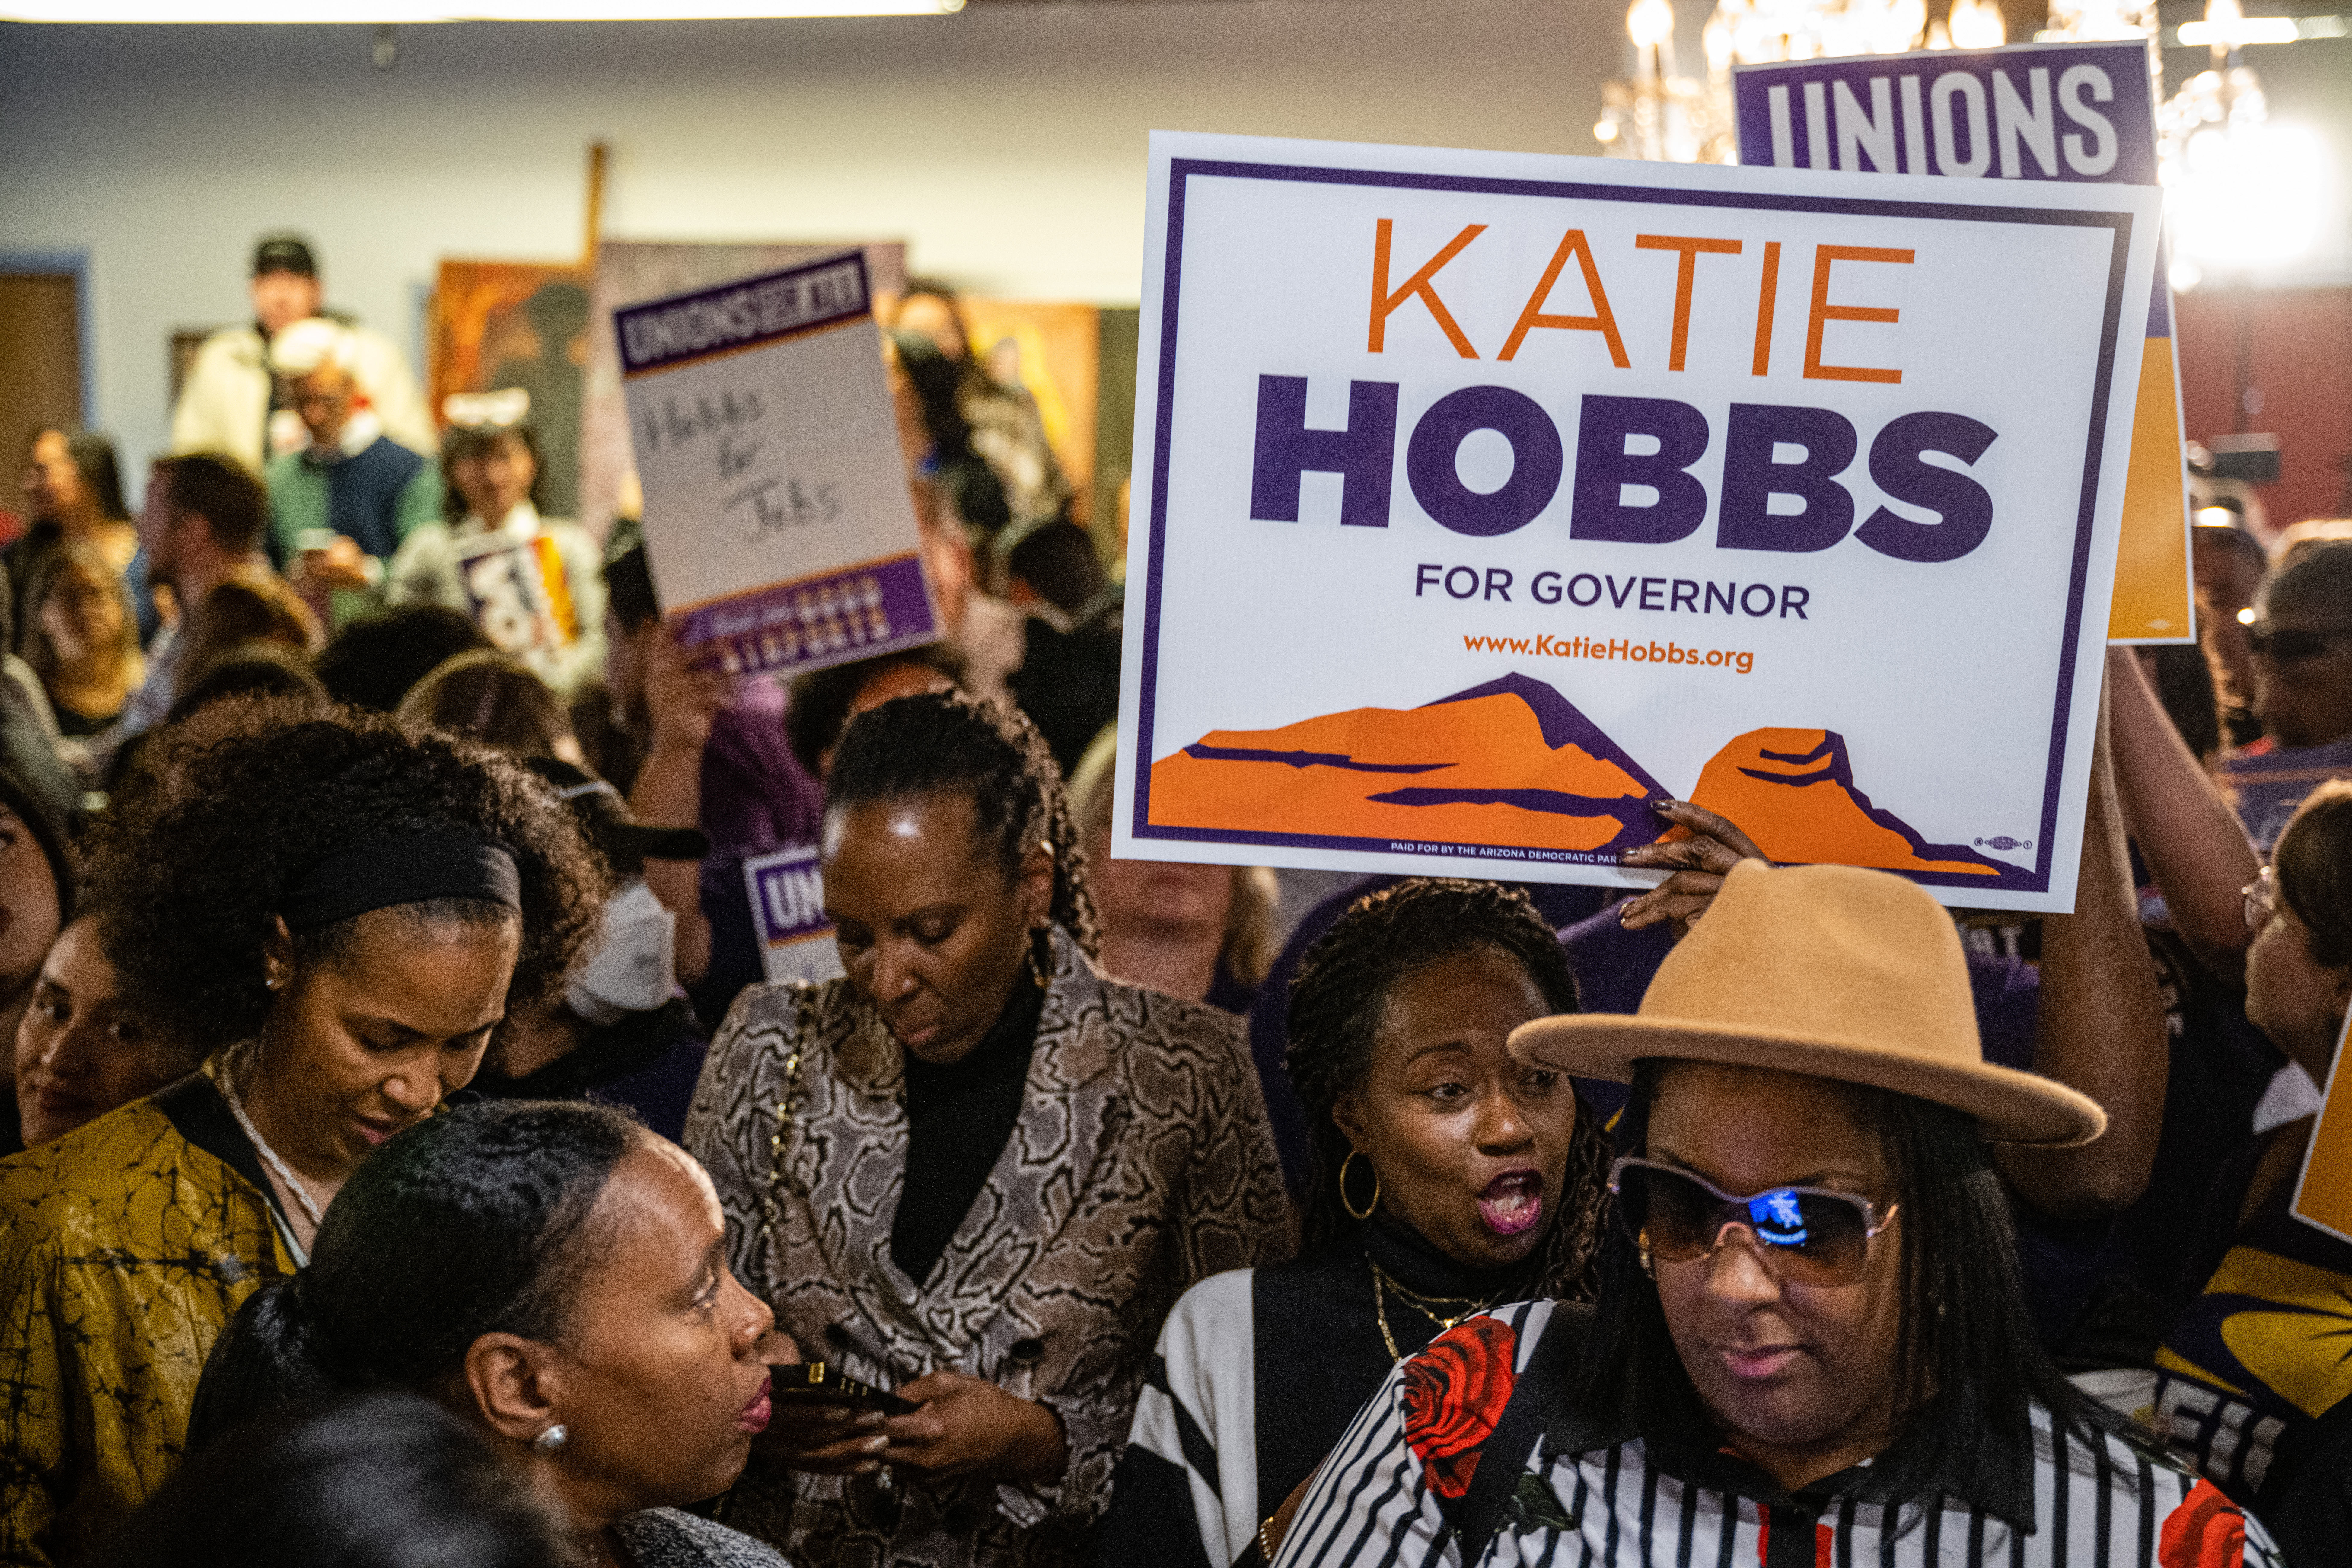 Attendees interact while holding signs supporting Governor-elect of Arizona Katie Hobbs at a rally to celebrate Hobbs' victory on November 15, 2022 in Phoenix, Arizona. Major news organizations announced her win over Trump endorsed republican candidate for governor Kari Lake. (Photo by Jon Cherry/Getty Images)